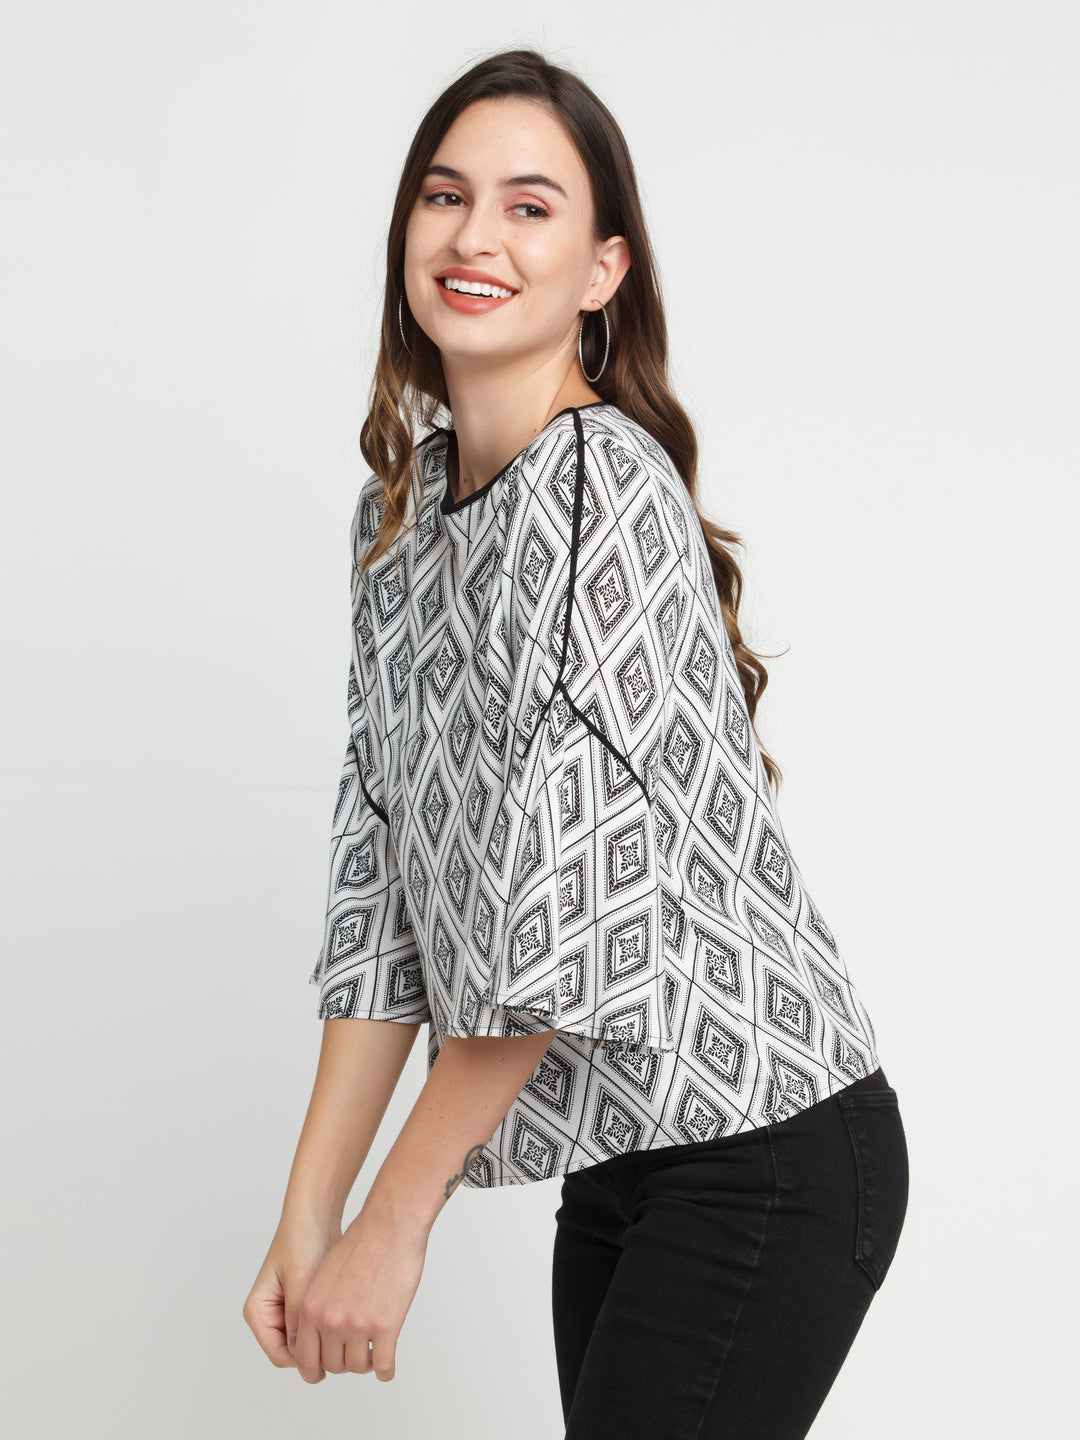 White Printed Top For Women